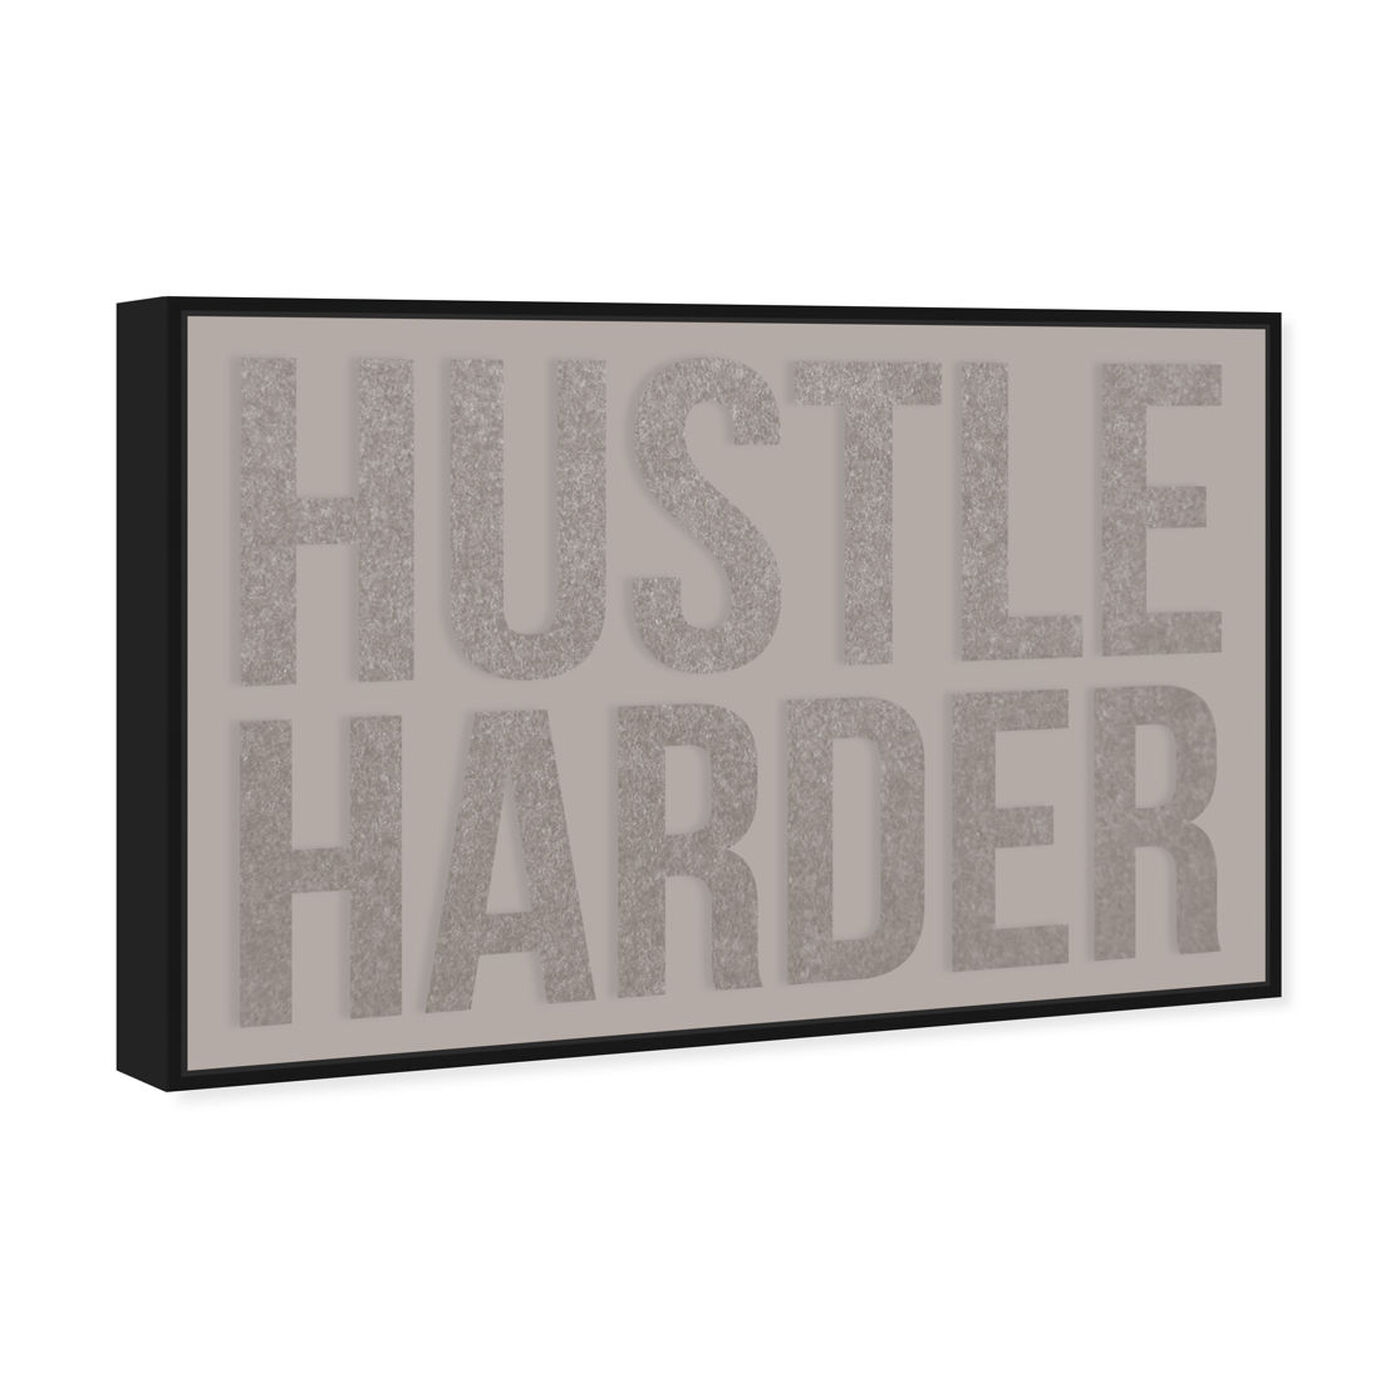 Angled view of Hustle Hard featuring typography and quotes and inspirational quotes and sayings art.